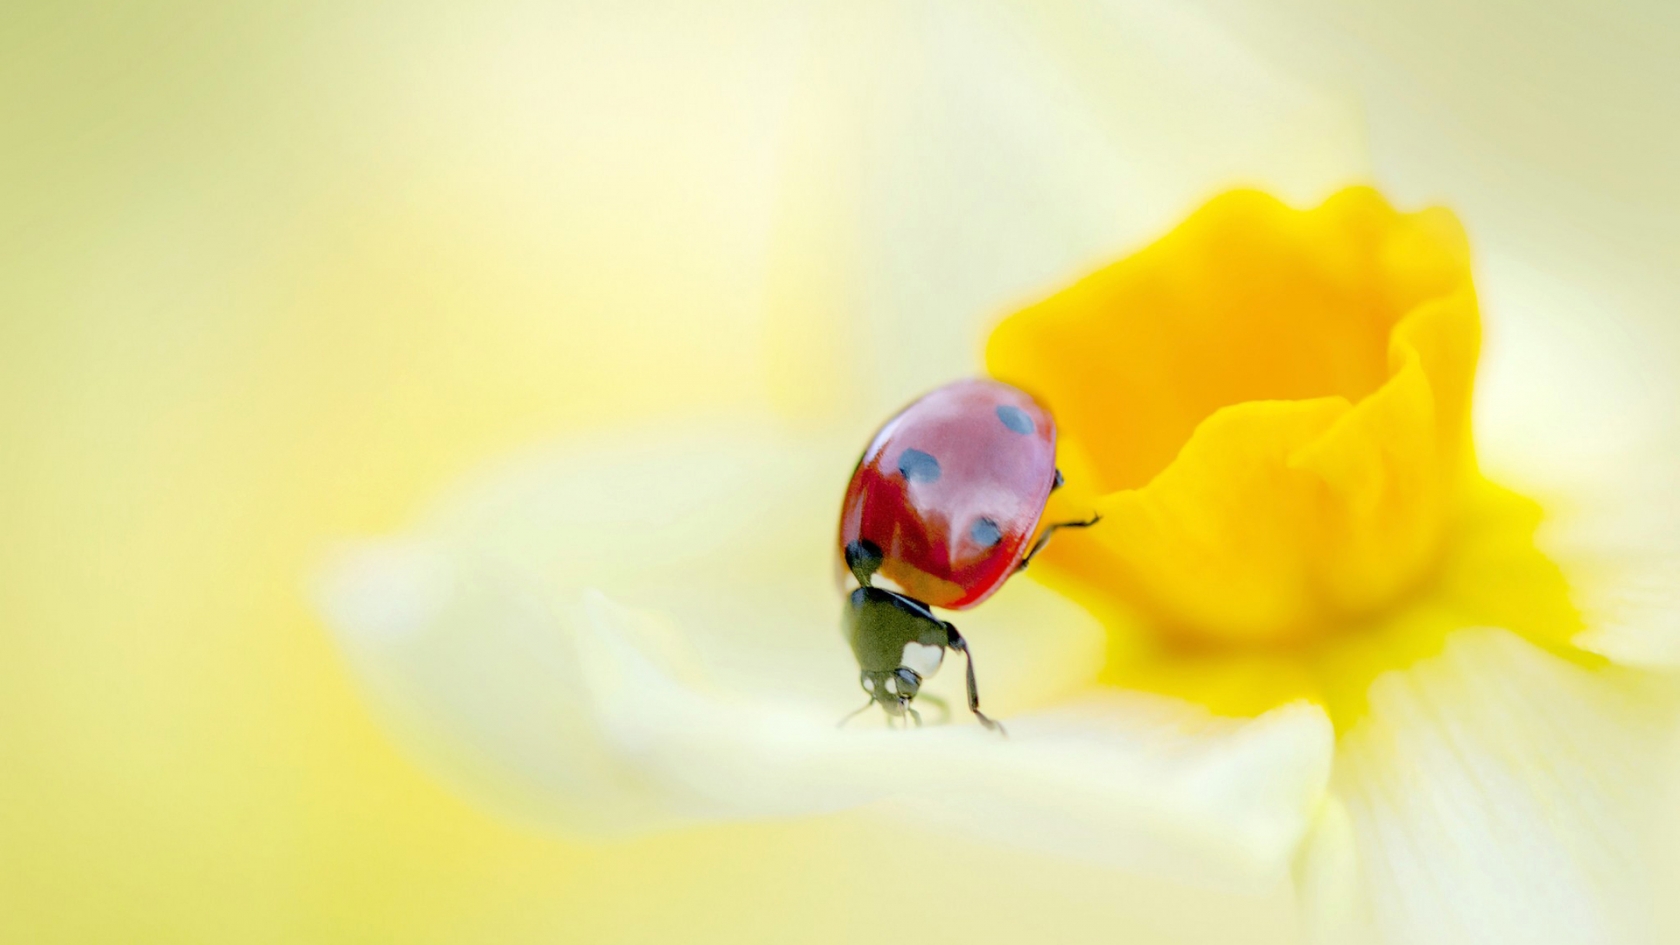 Ladybird on a Yellow Daffodil Flower  for 1680 x 945 HDTV resolution